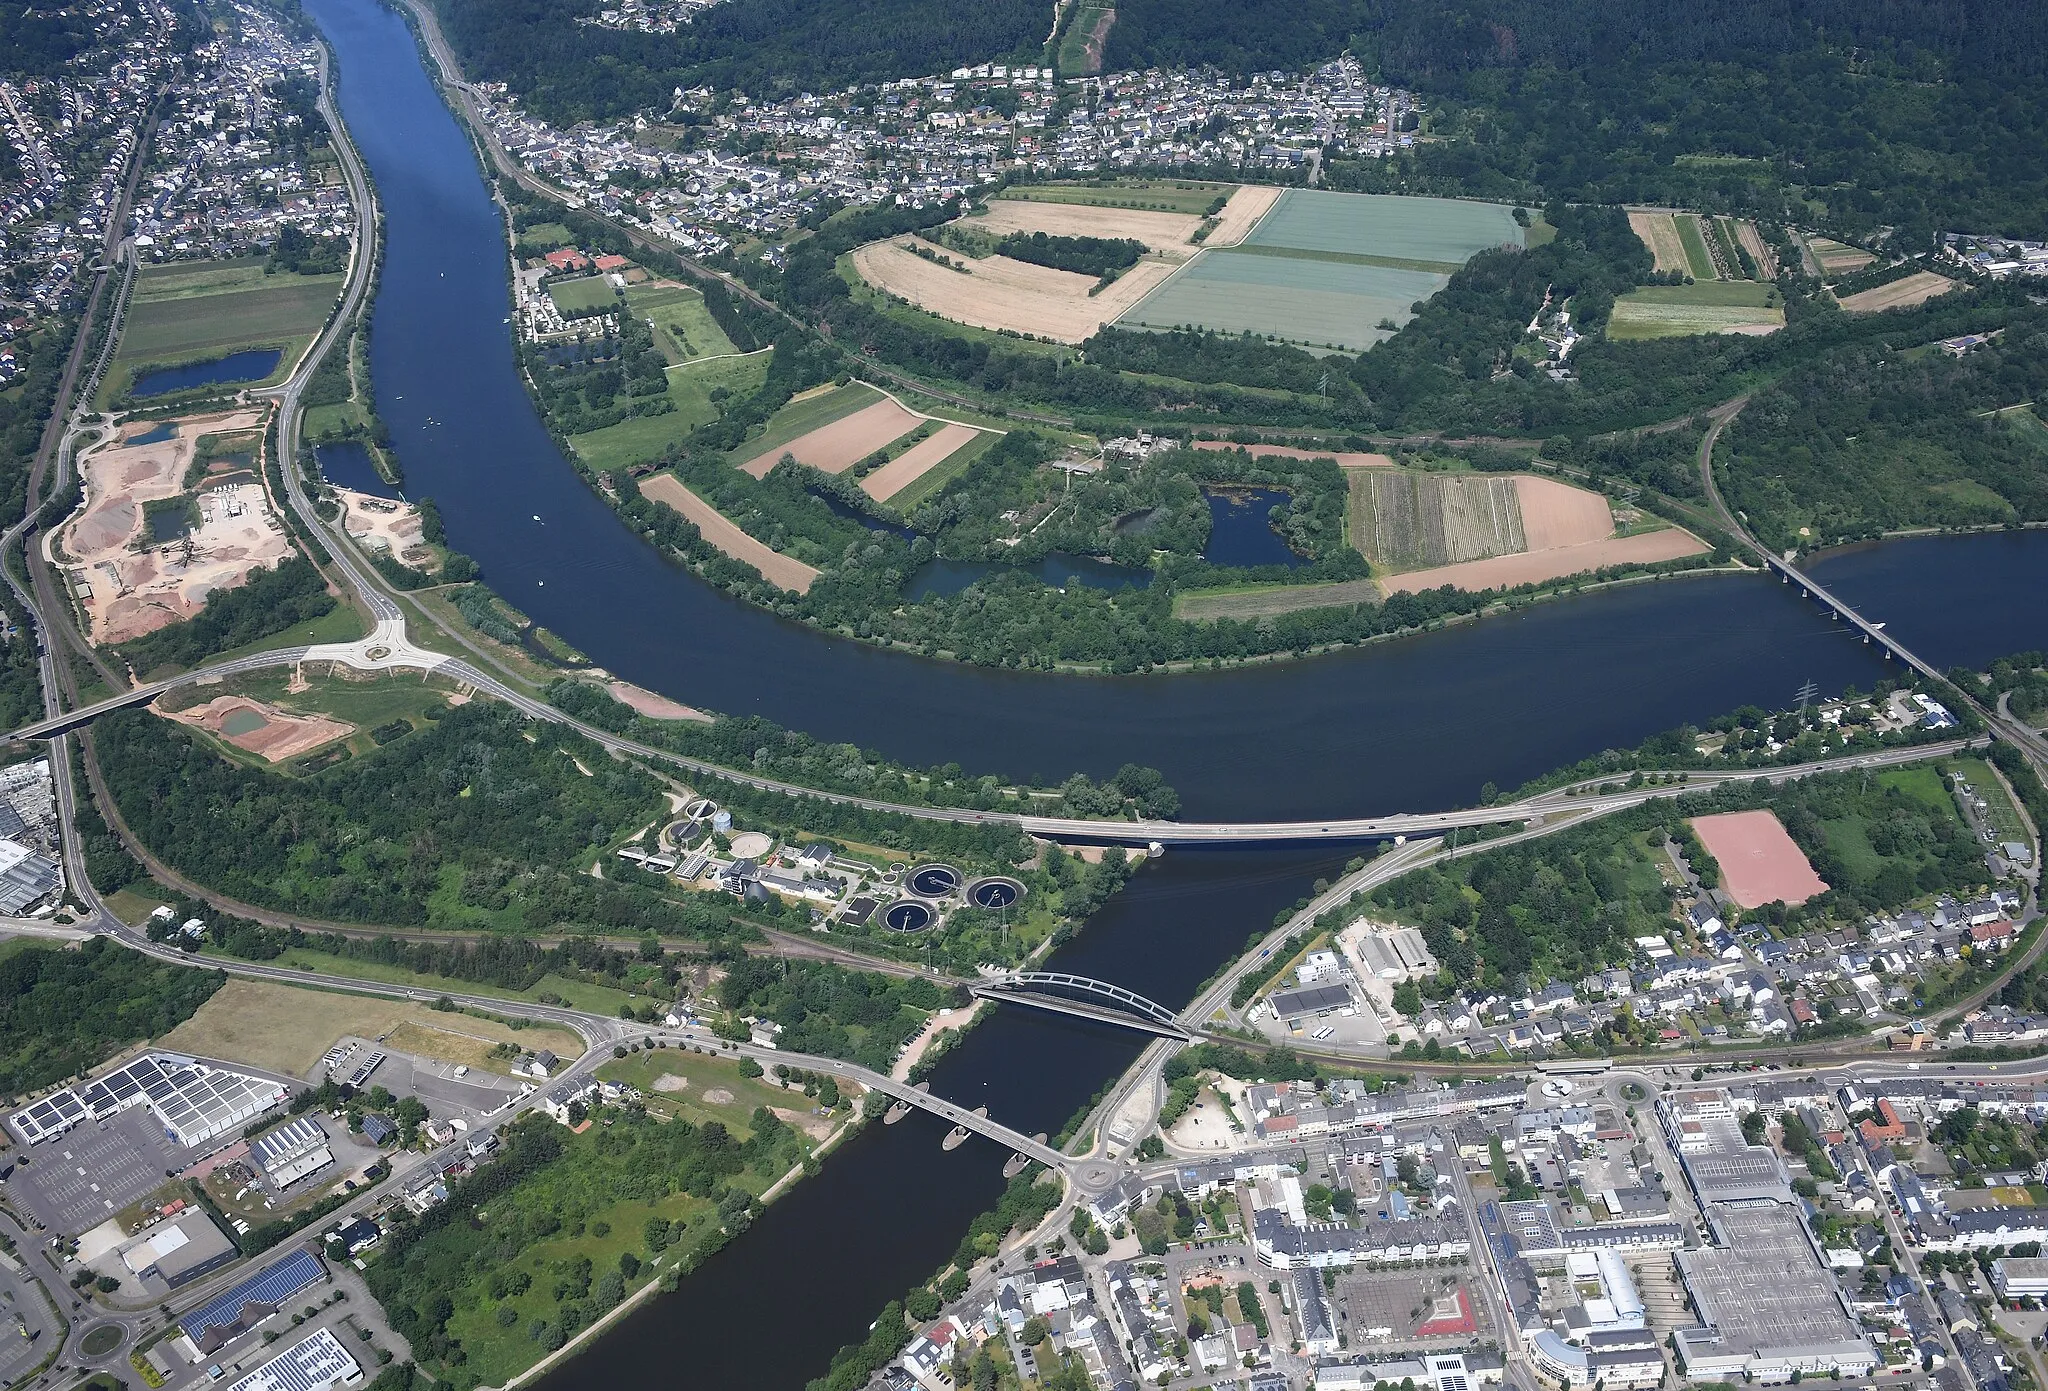 Photo showing: Aerial image of the confluence of the Saar (at the bottom of the image) and the Moselle rivers in Konz